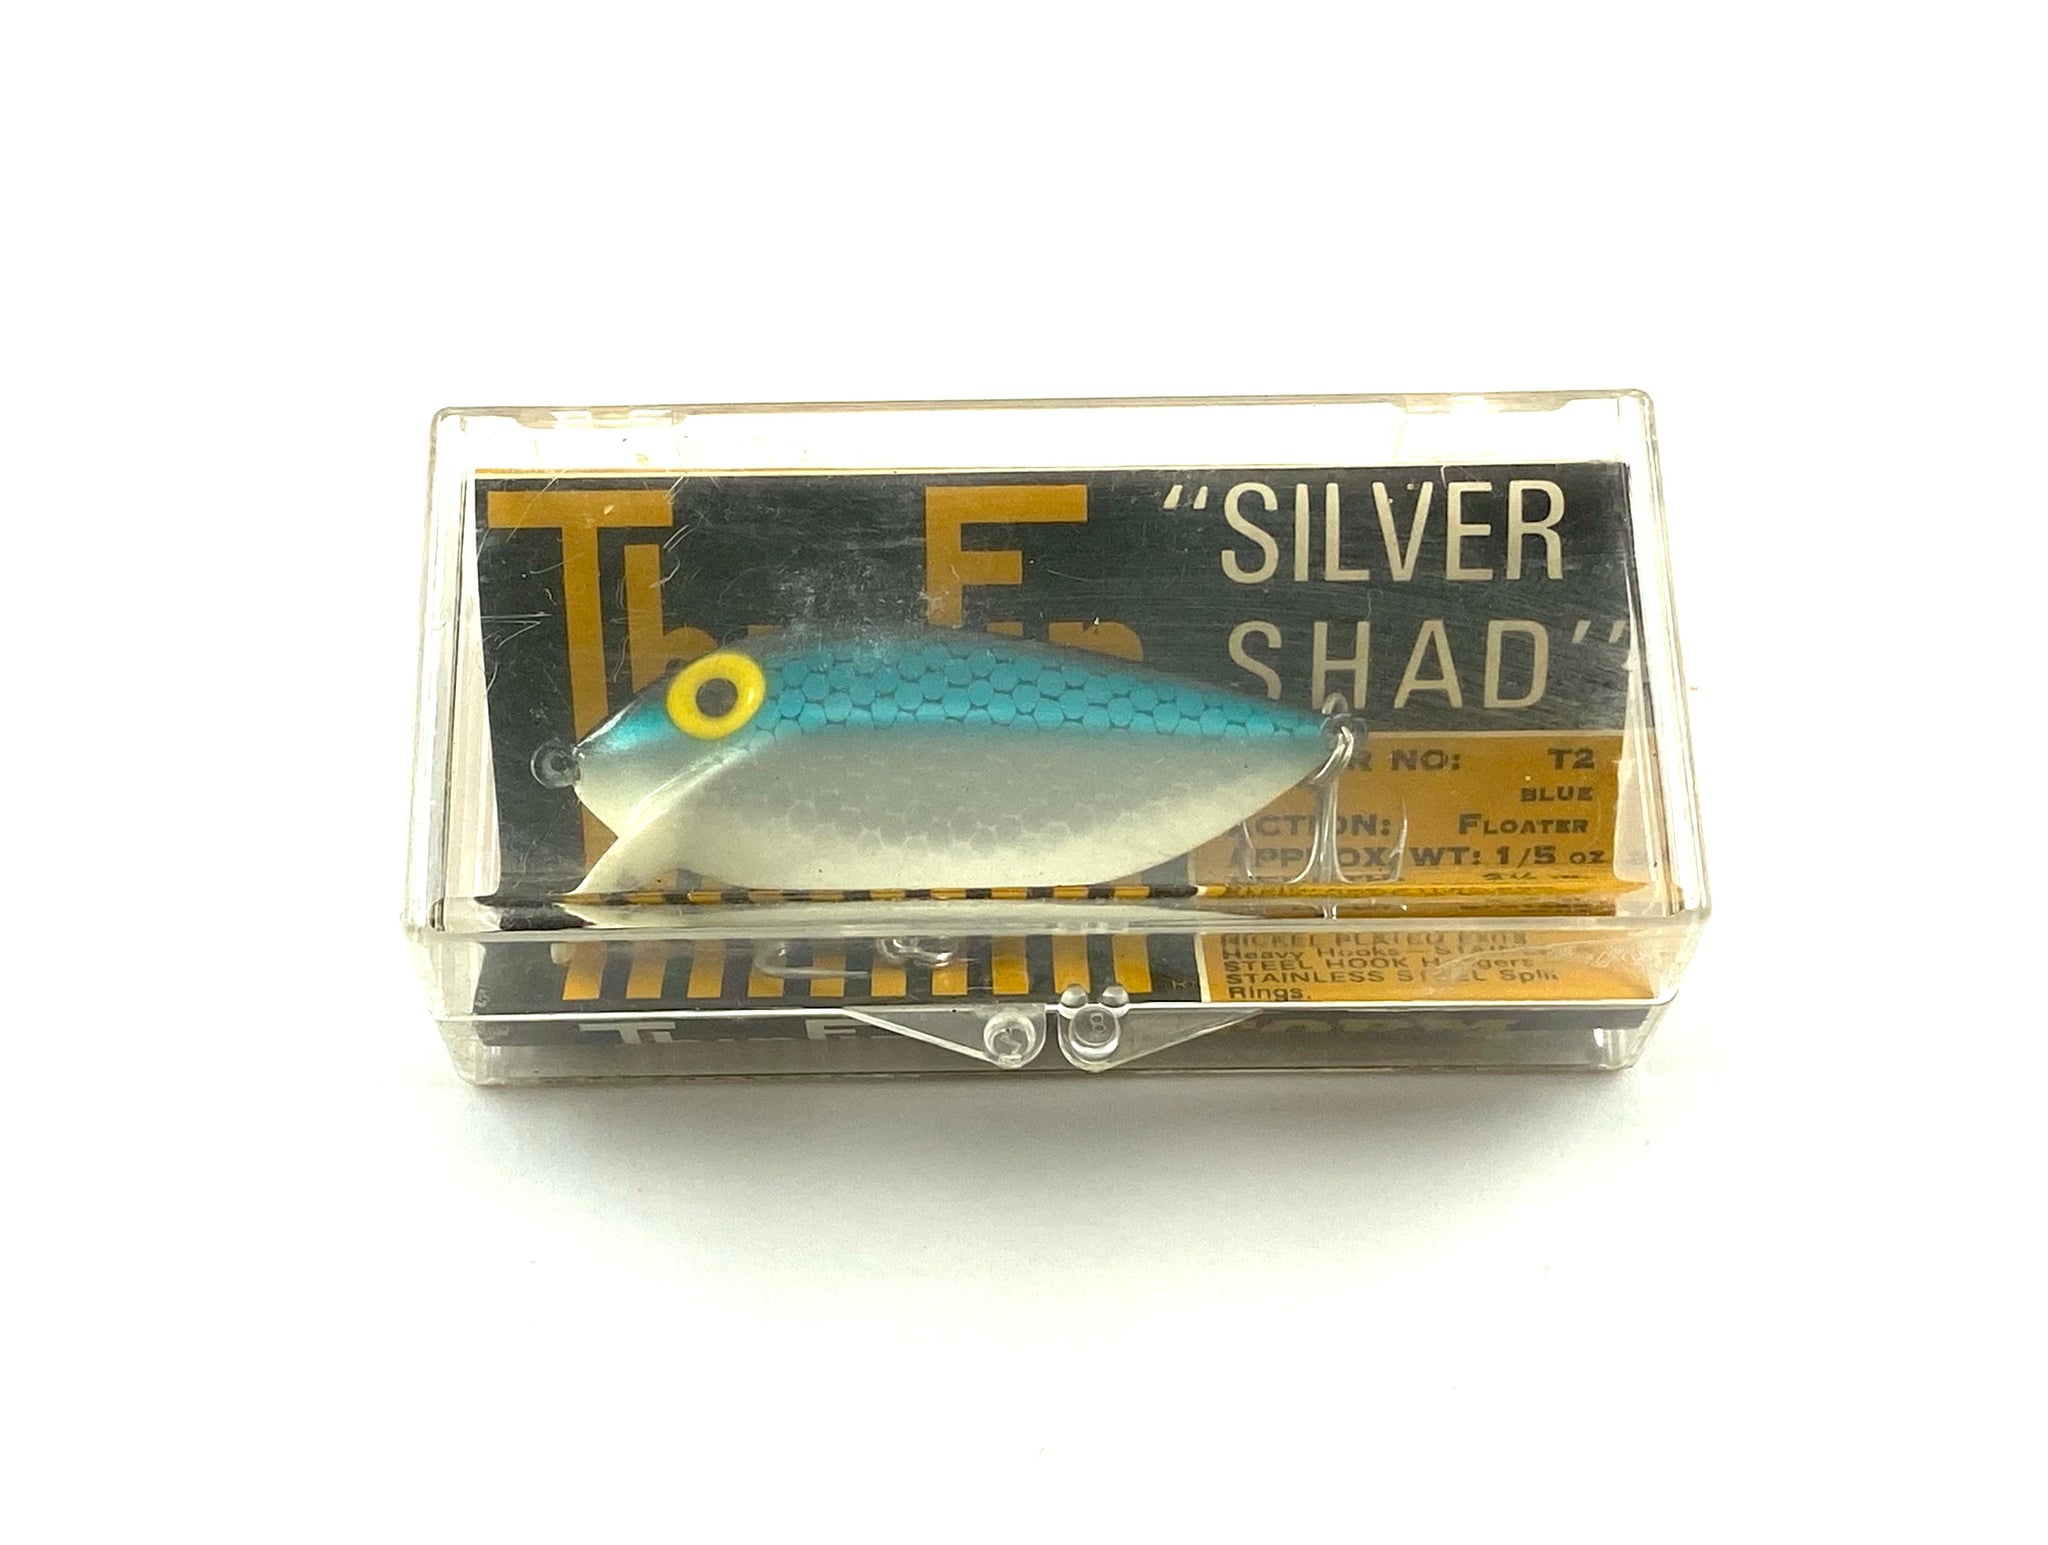 Vintage STORM ThinFin SILVER SHAD Fishing Lure in Original Snap